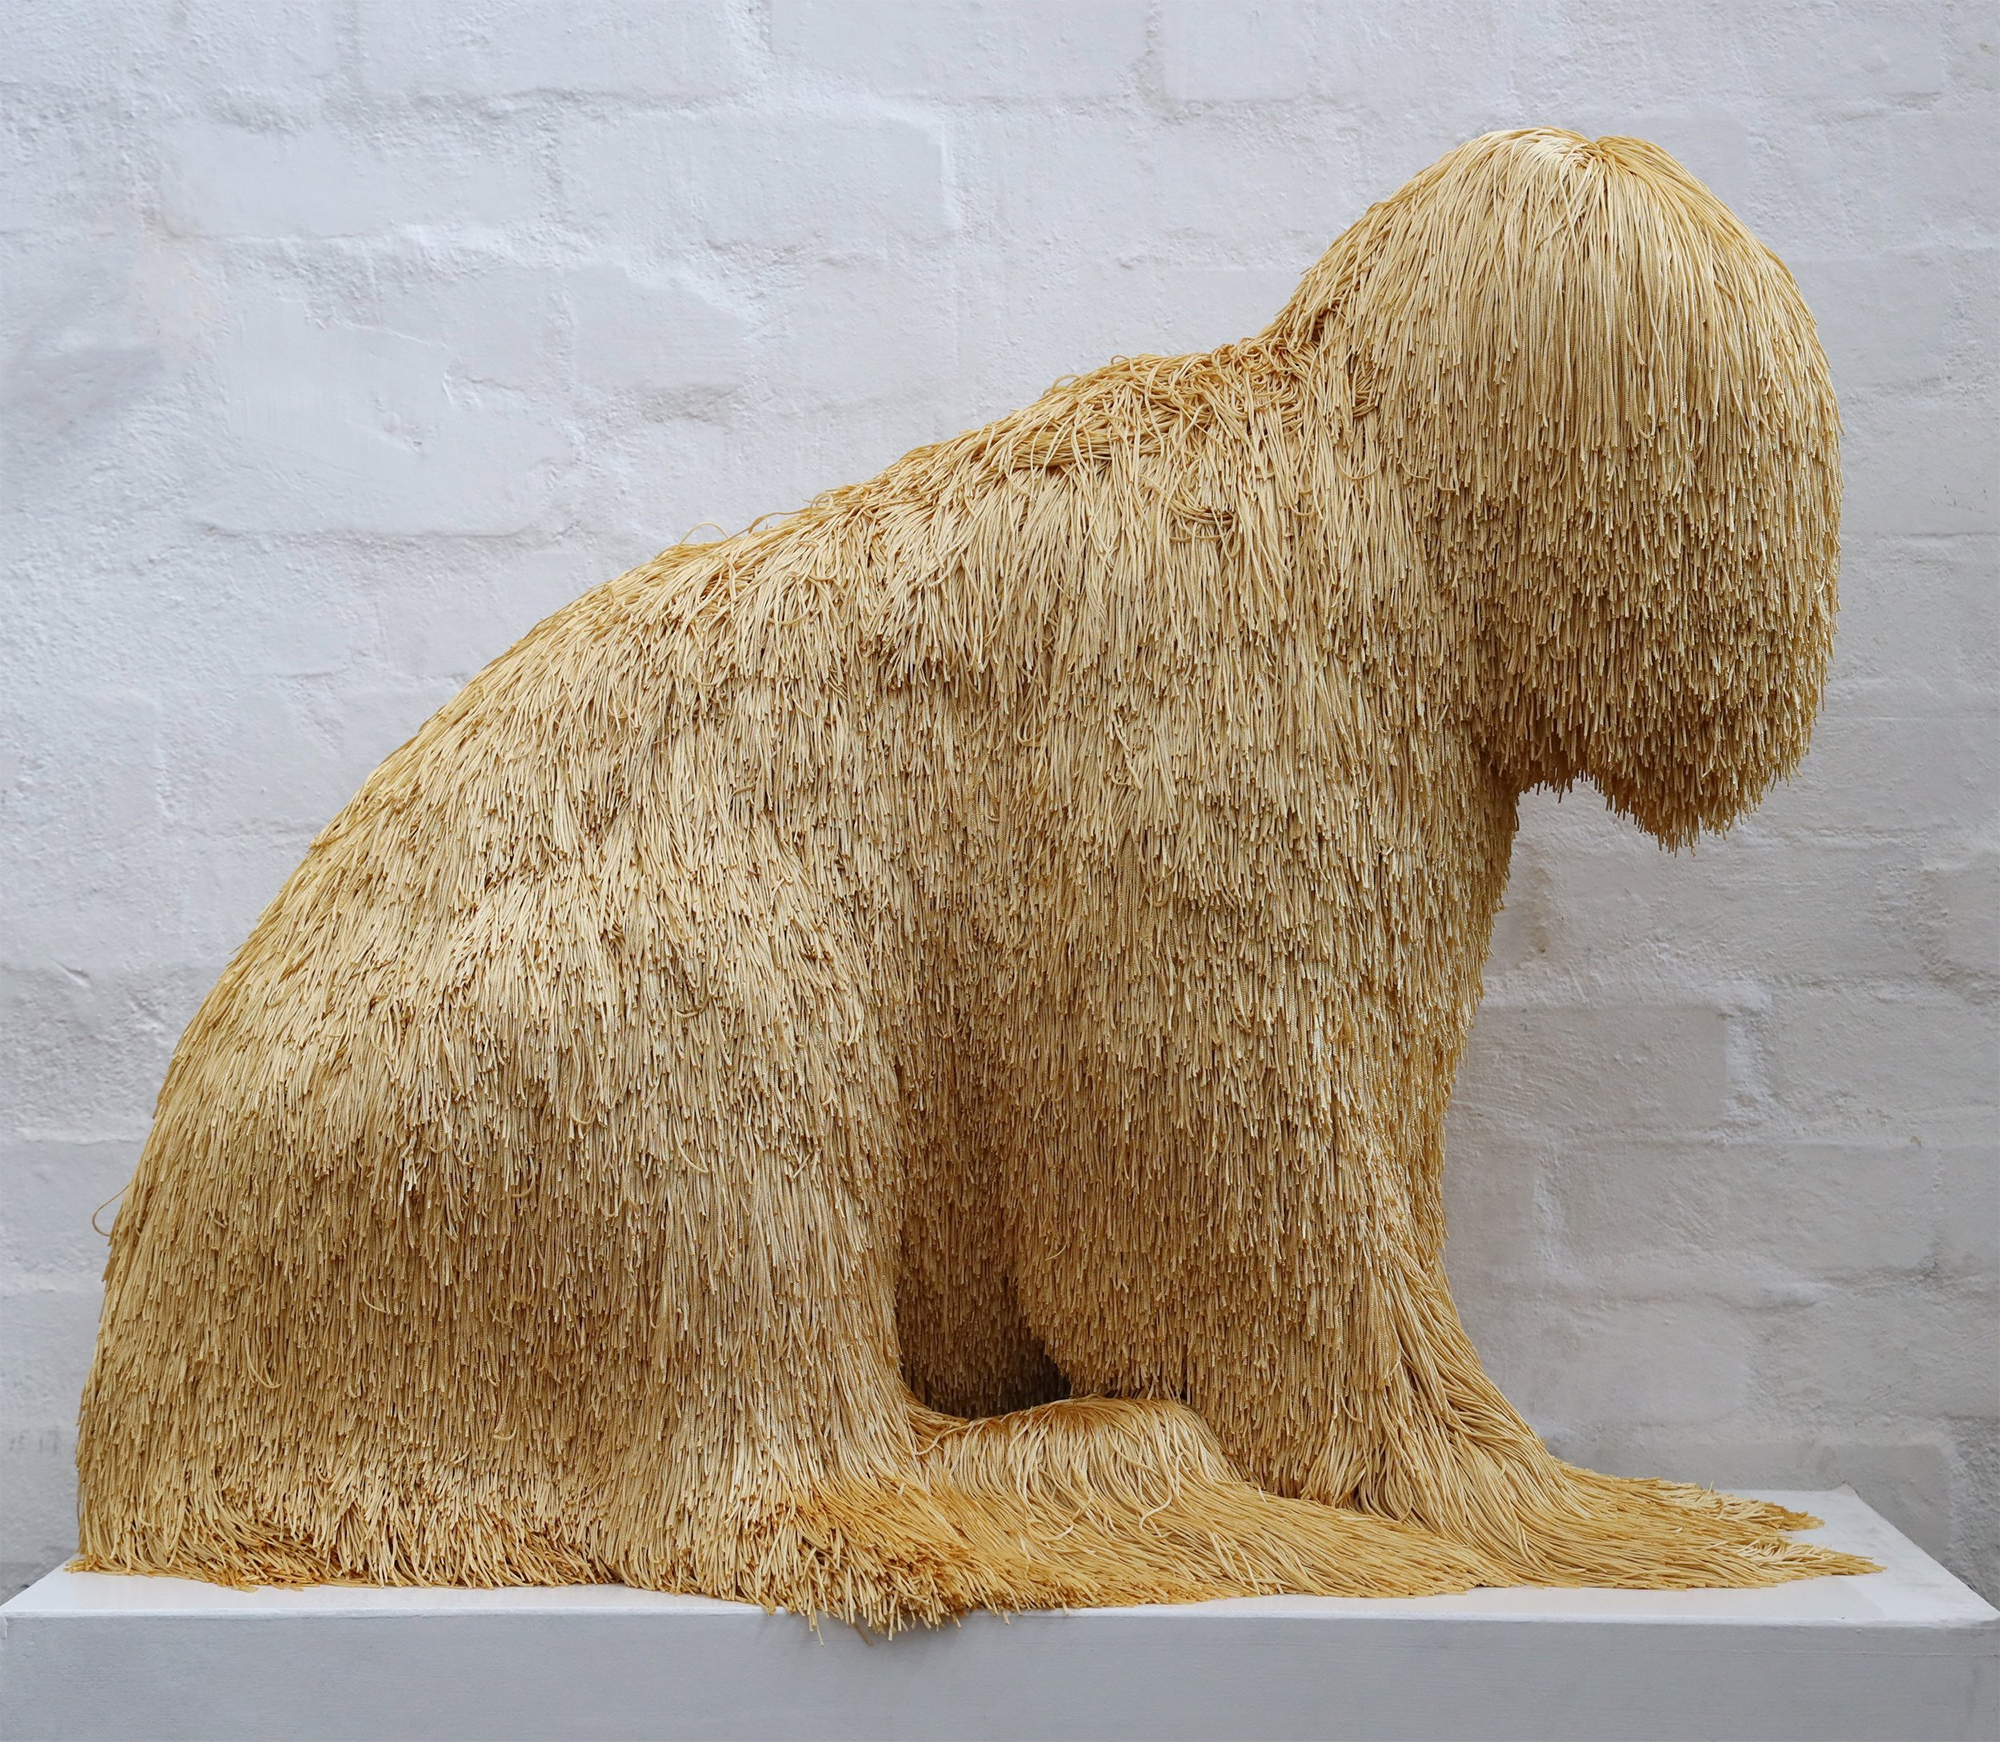 Swaths of Colorful Fringe Disguise Animalistic Sculptures by Artist Troy Emery | 国外美陈 美陈网站 美陈前沿 